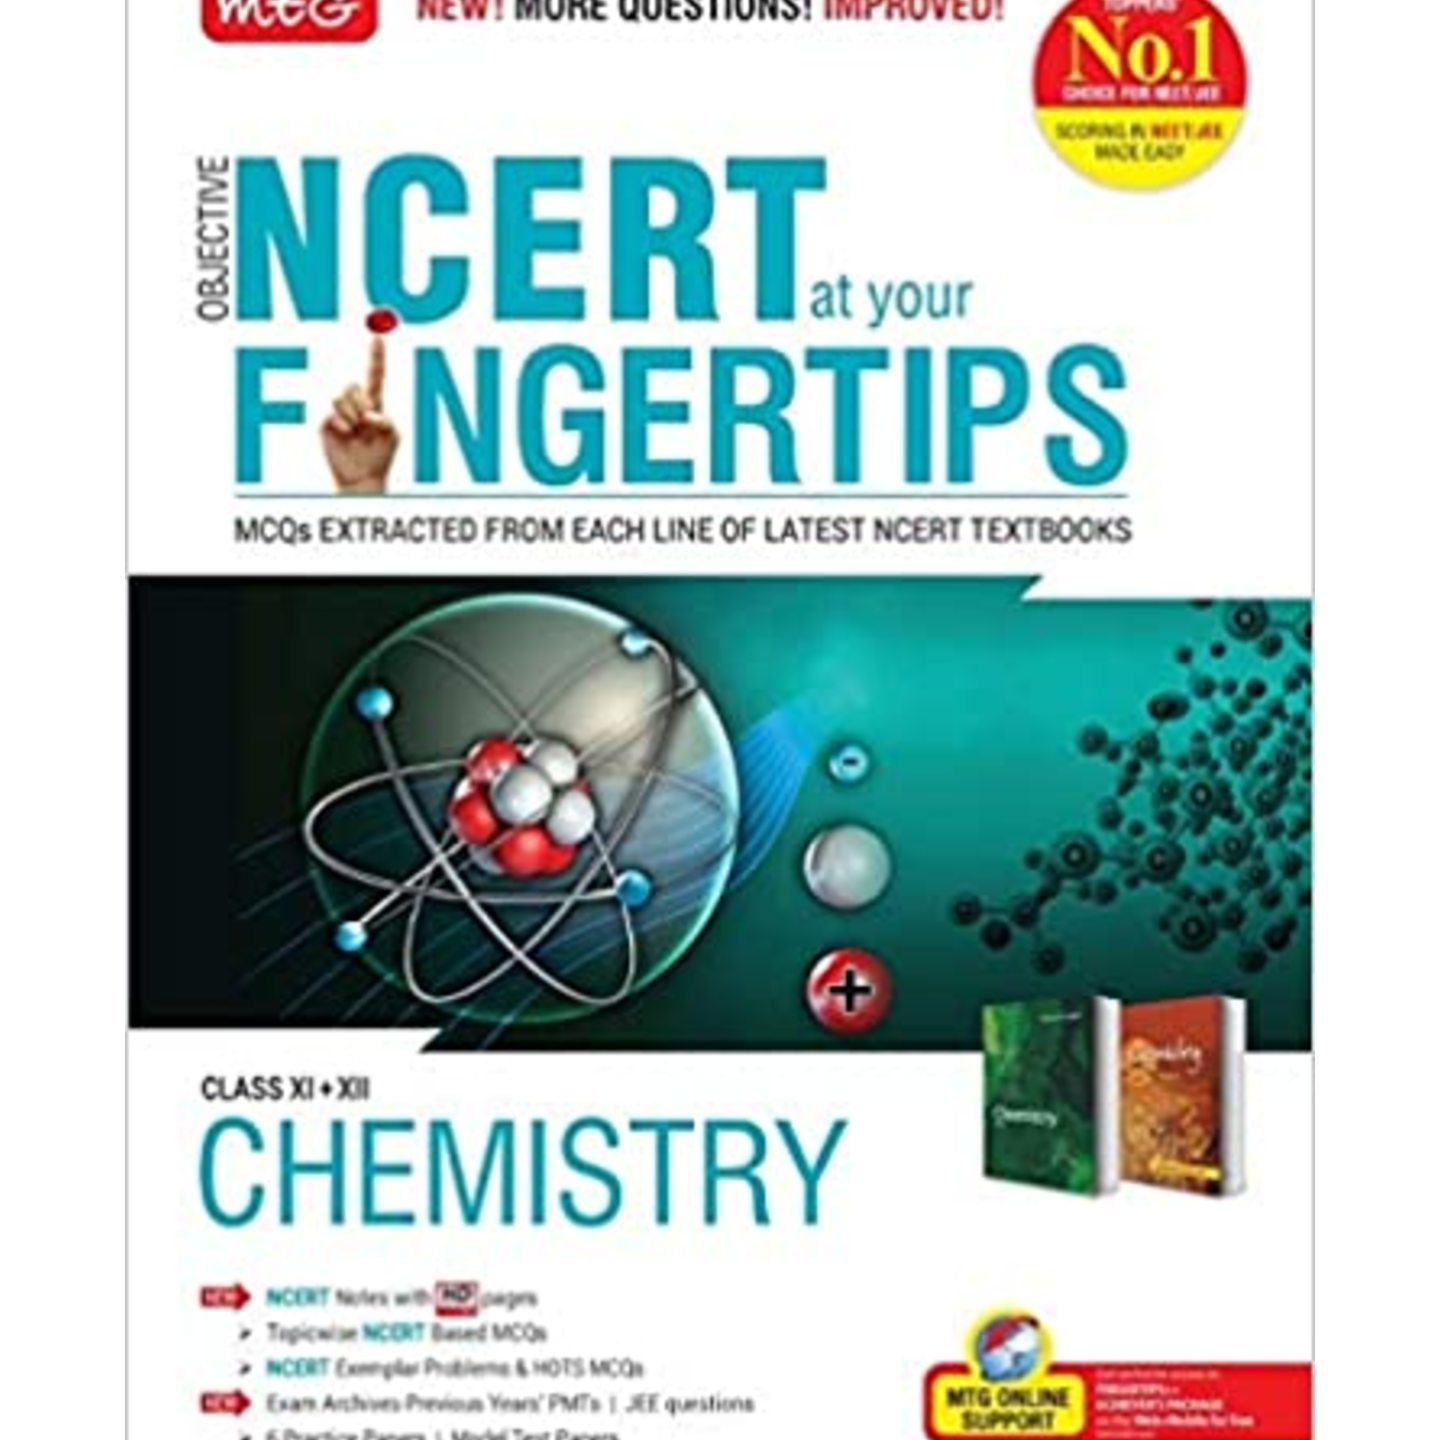 MTG Objective NCERT at your Fingertips for NEET-AIIMS